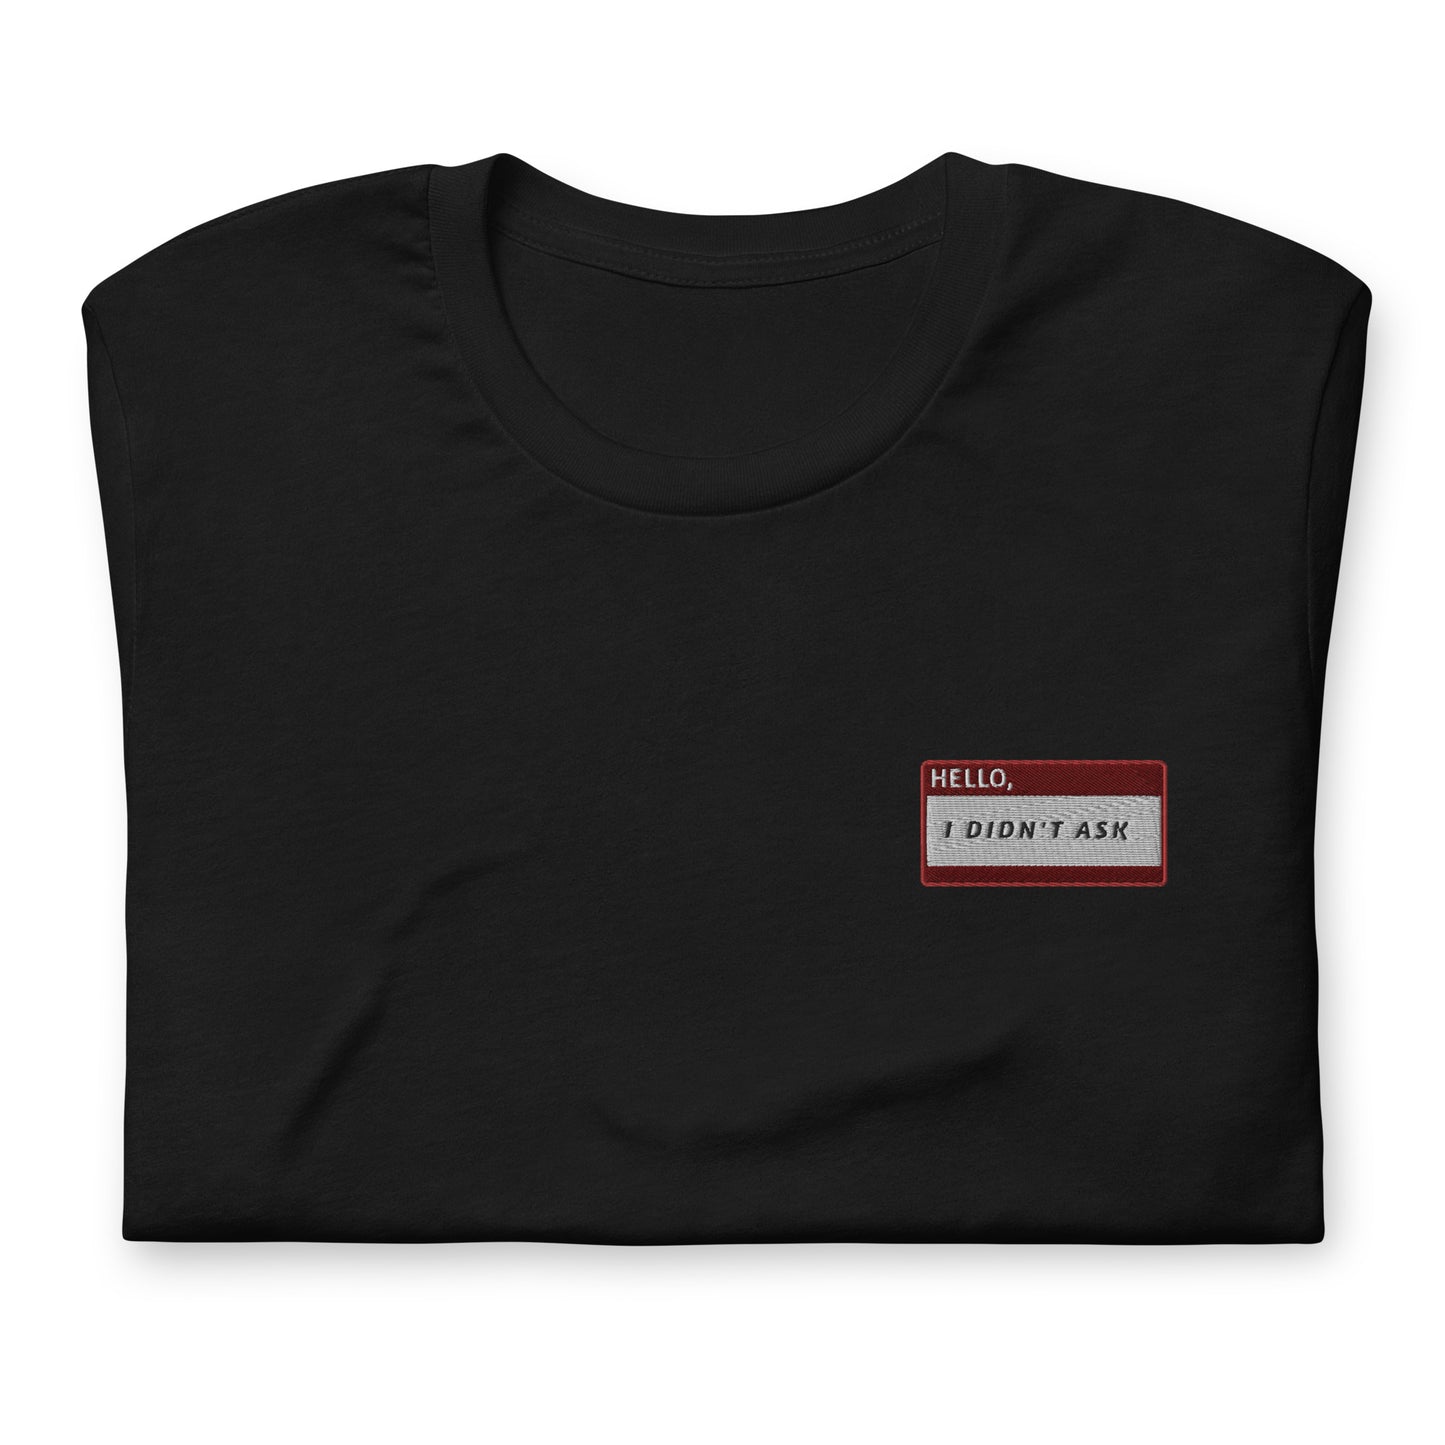 HELLO I DIDN'T ASK - Name Tag T-Shirt